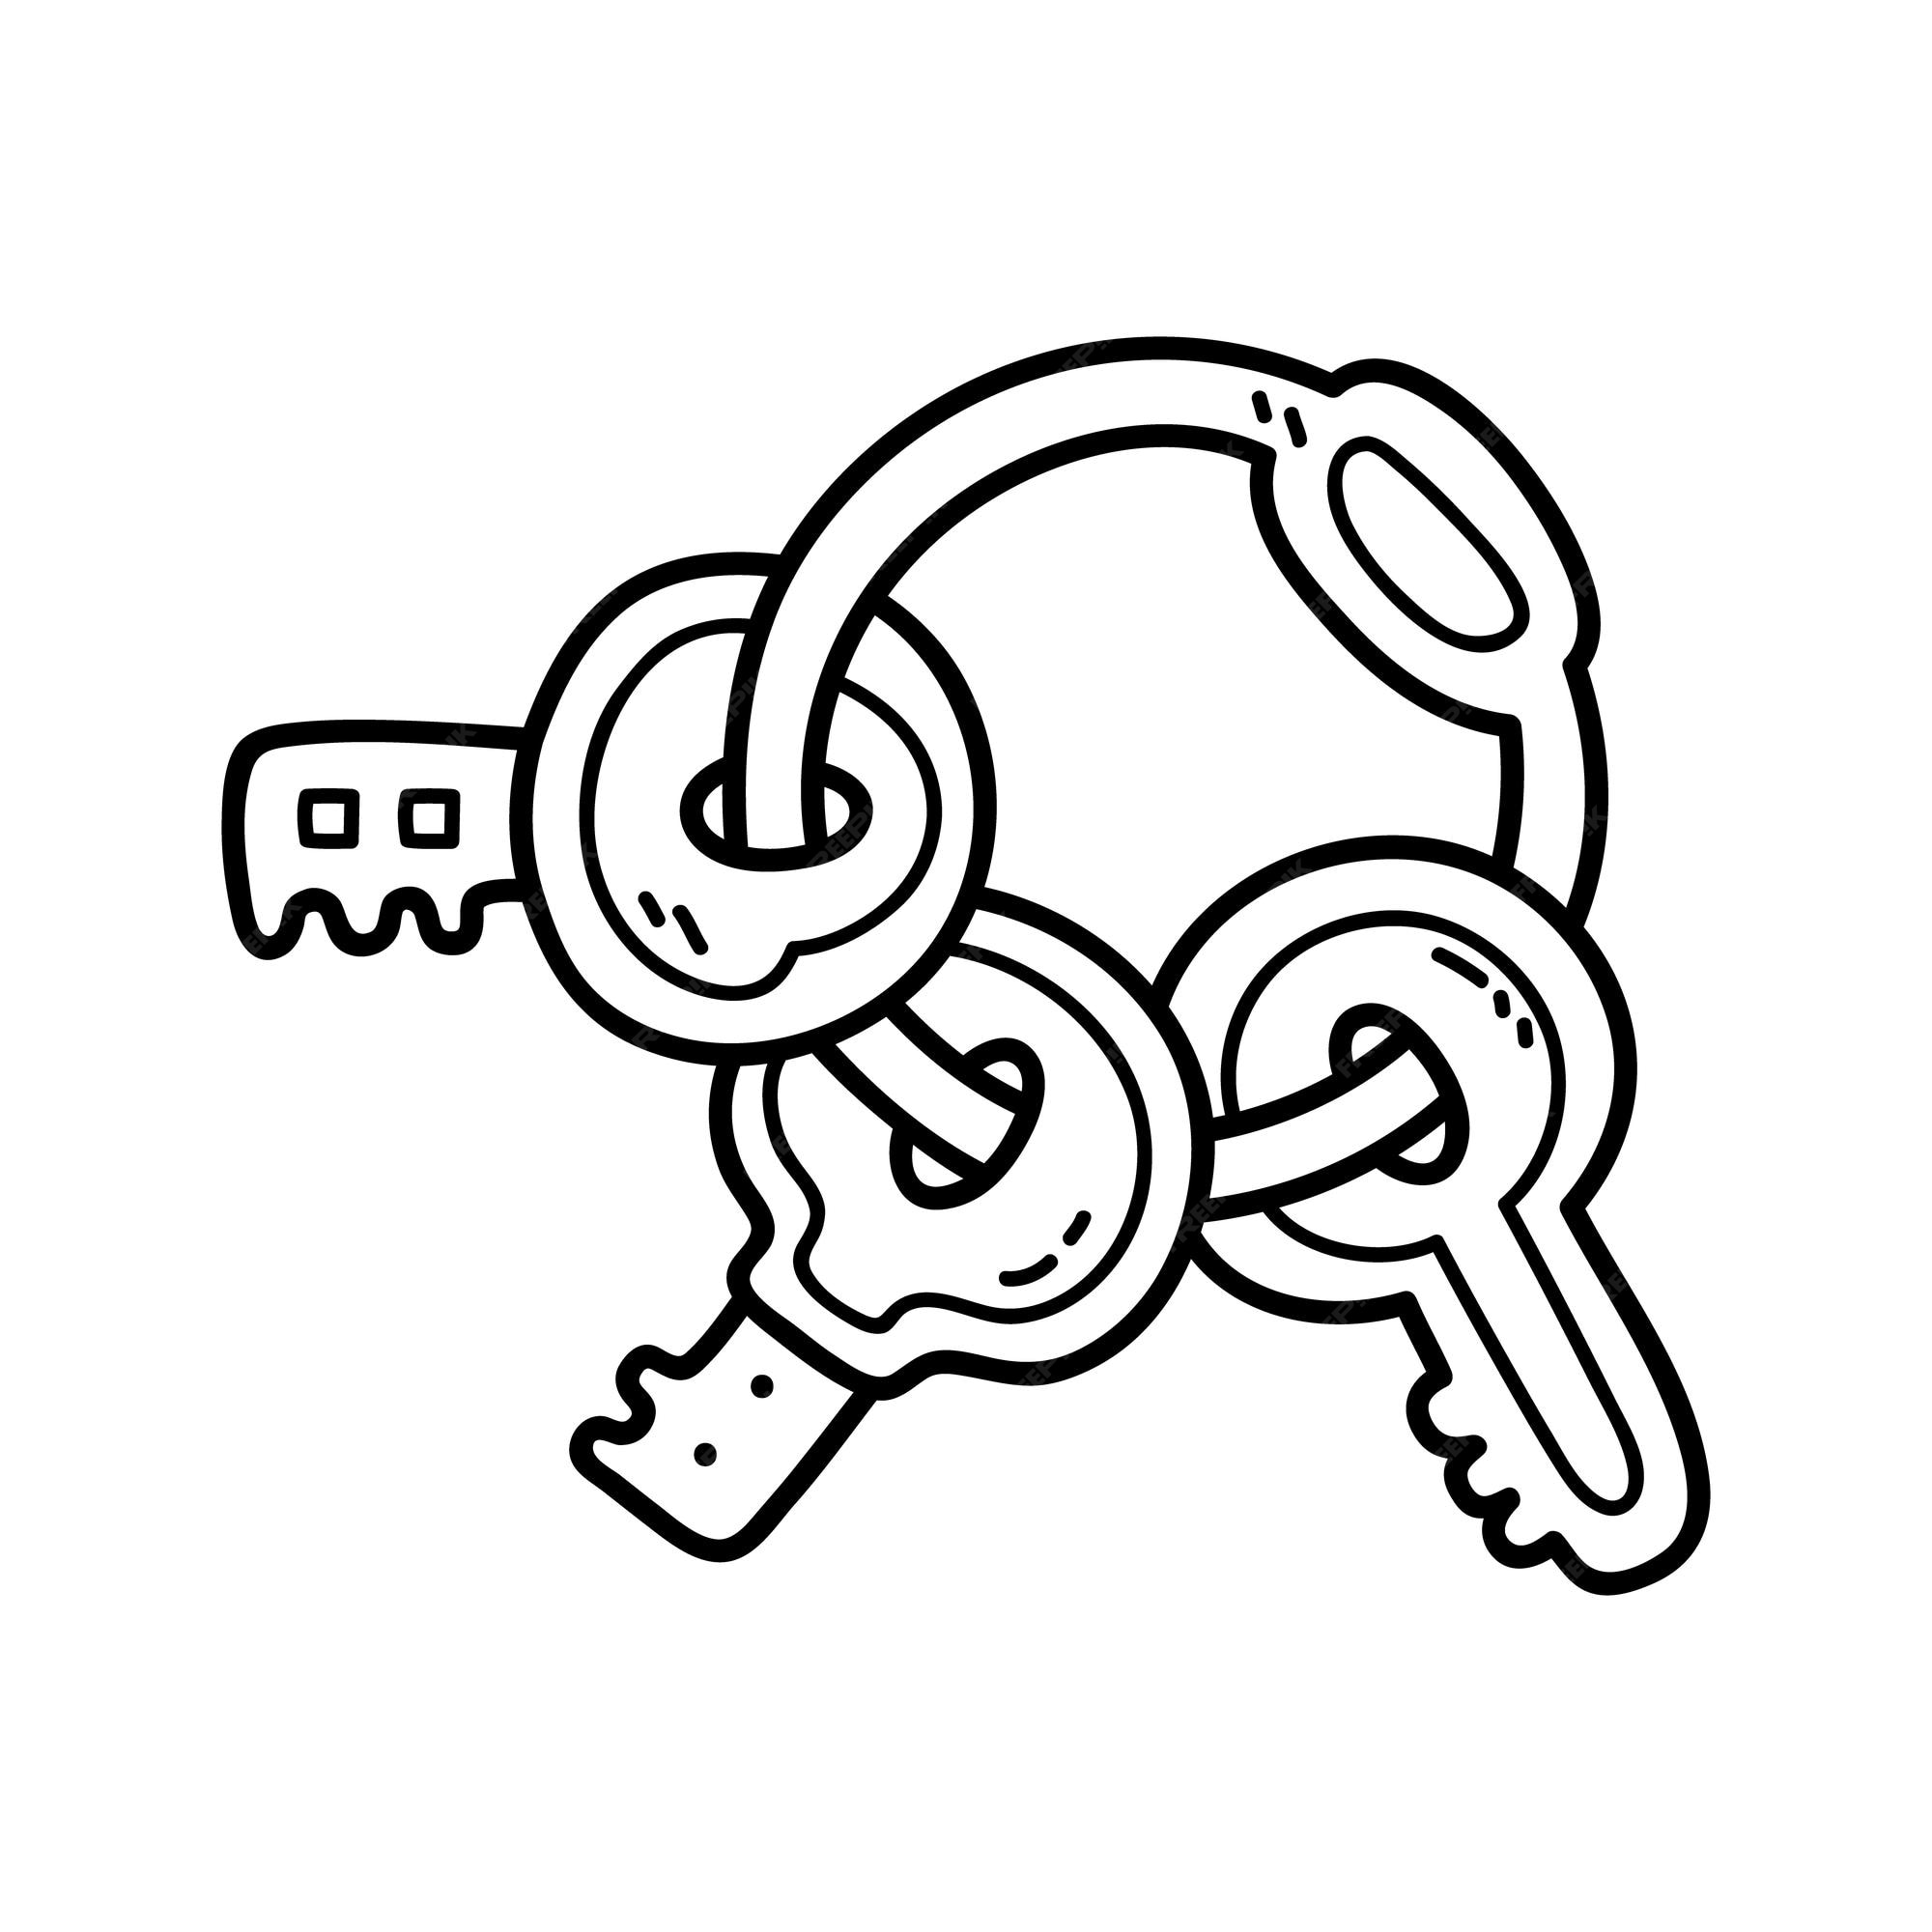 Premium vector coloring page with doodle key